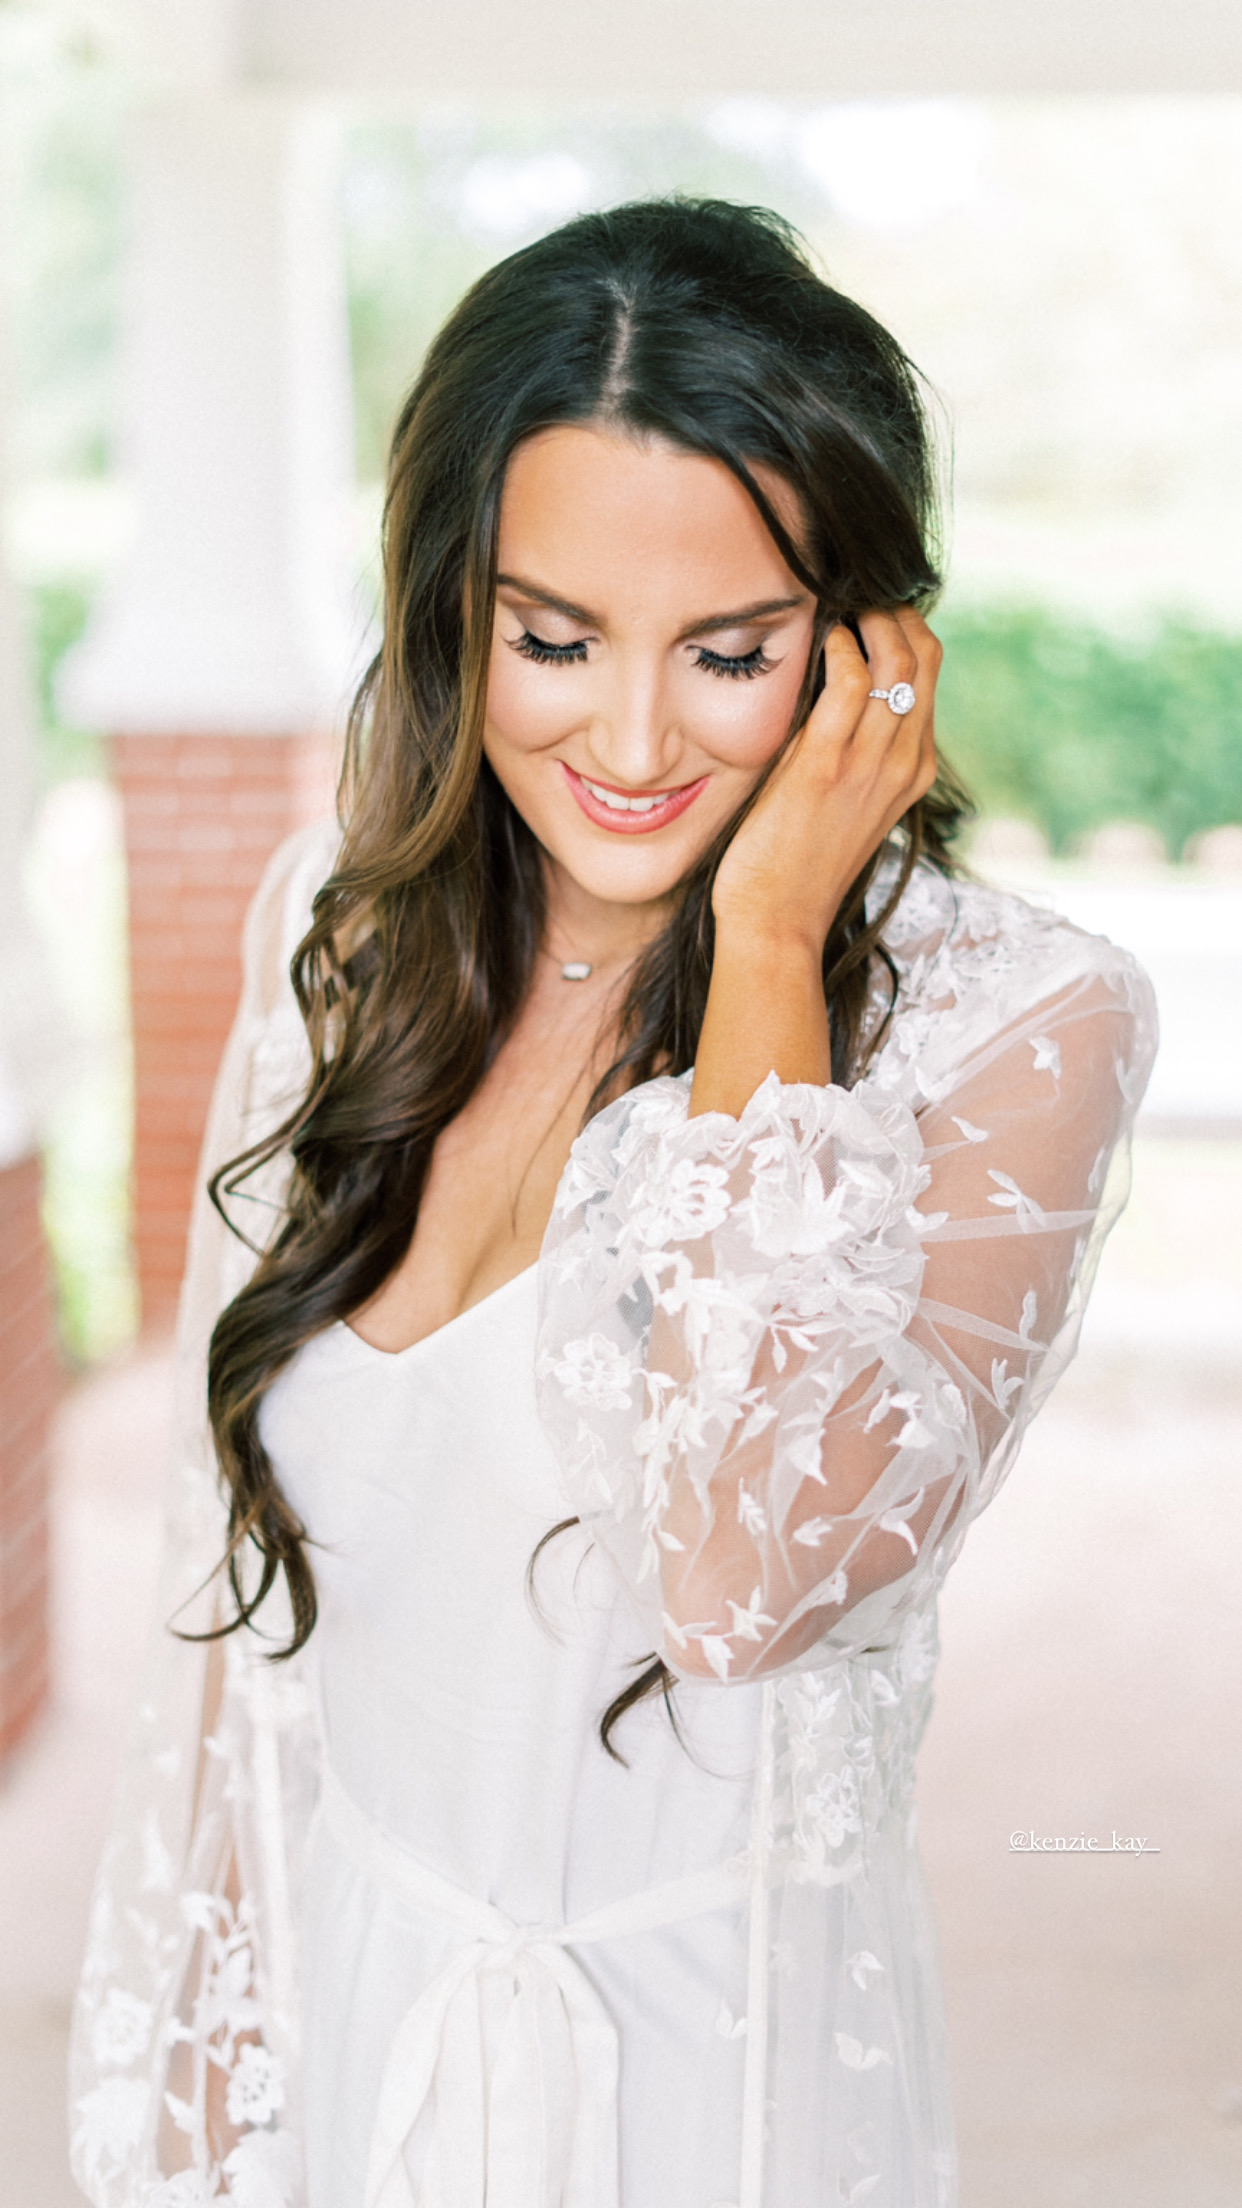 Bride on wedding day in lace robe